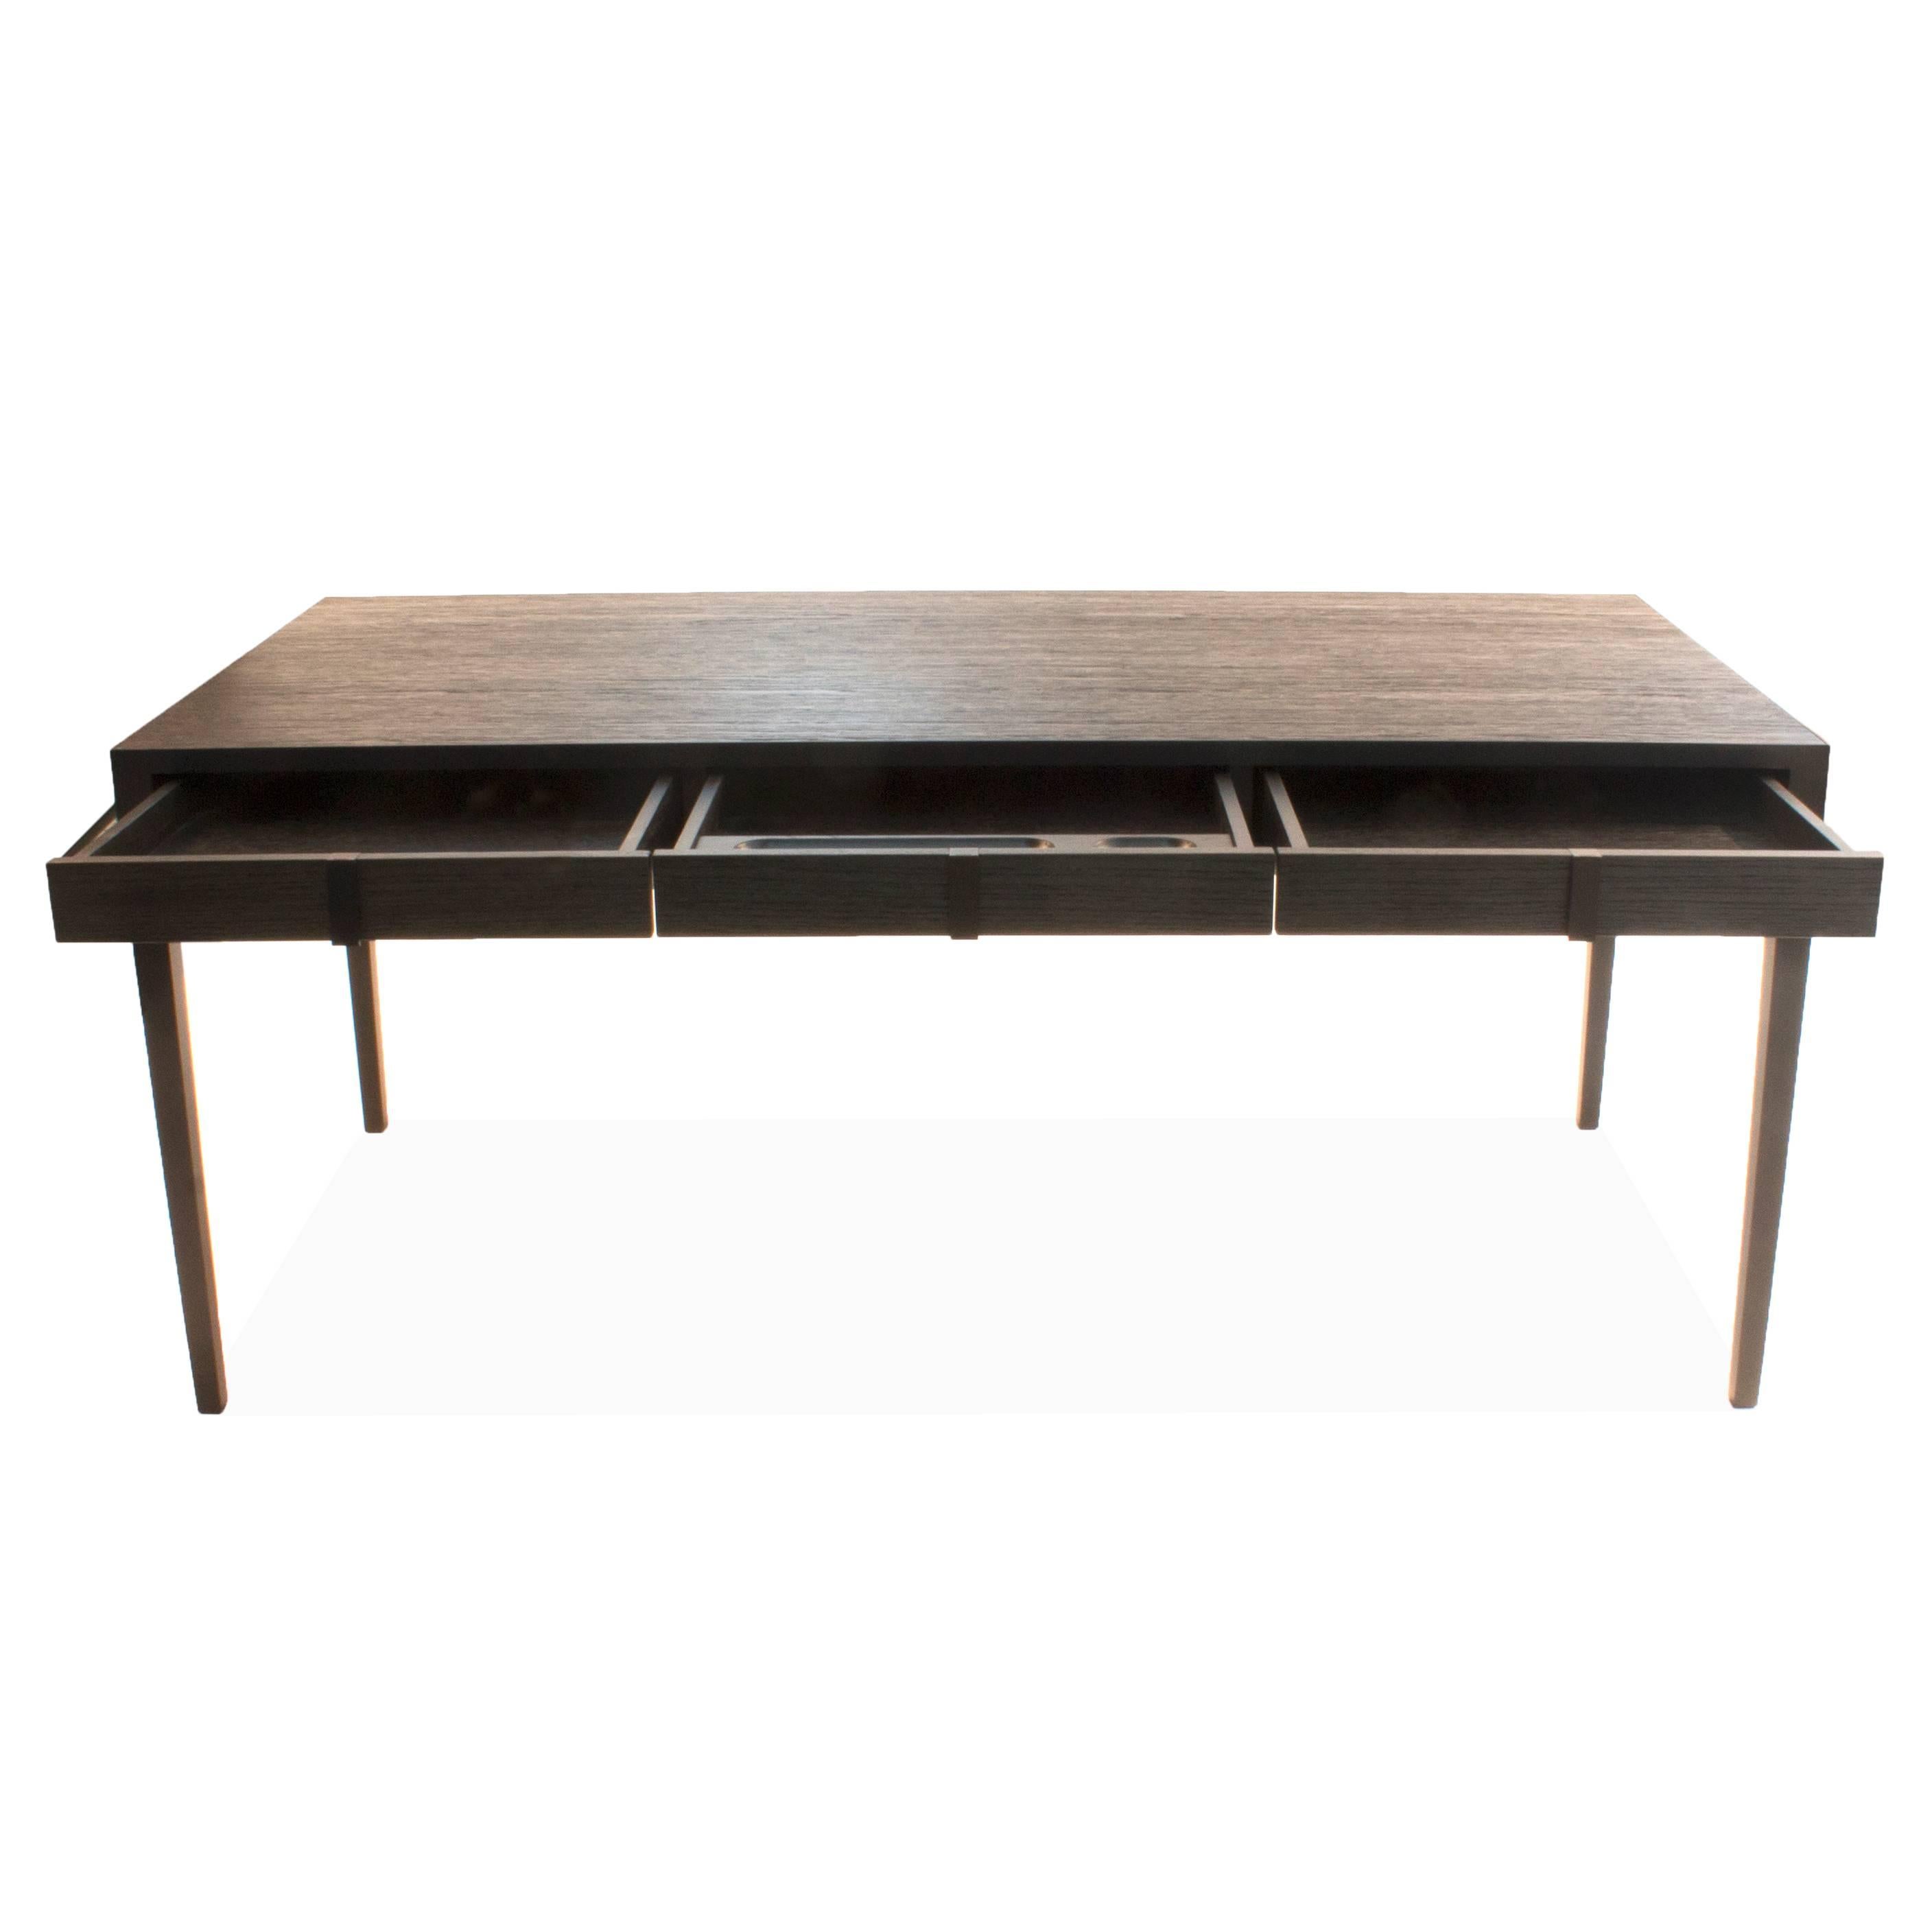 Metal frame desk with heavily wire brushed oak surface. Each drawer has a metal pull handle and center drawer has an organizer.